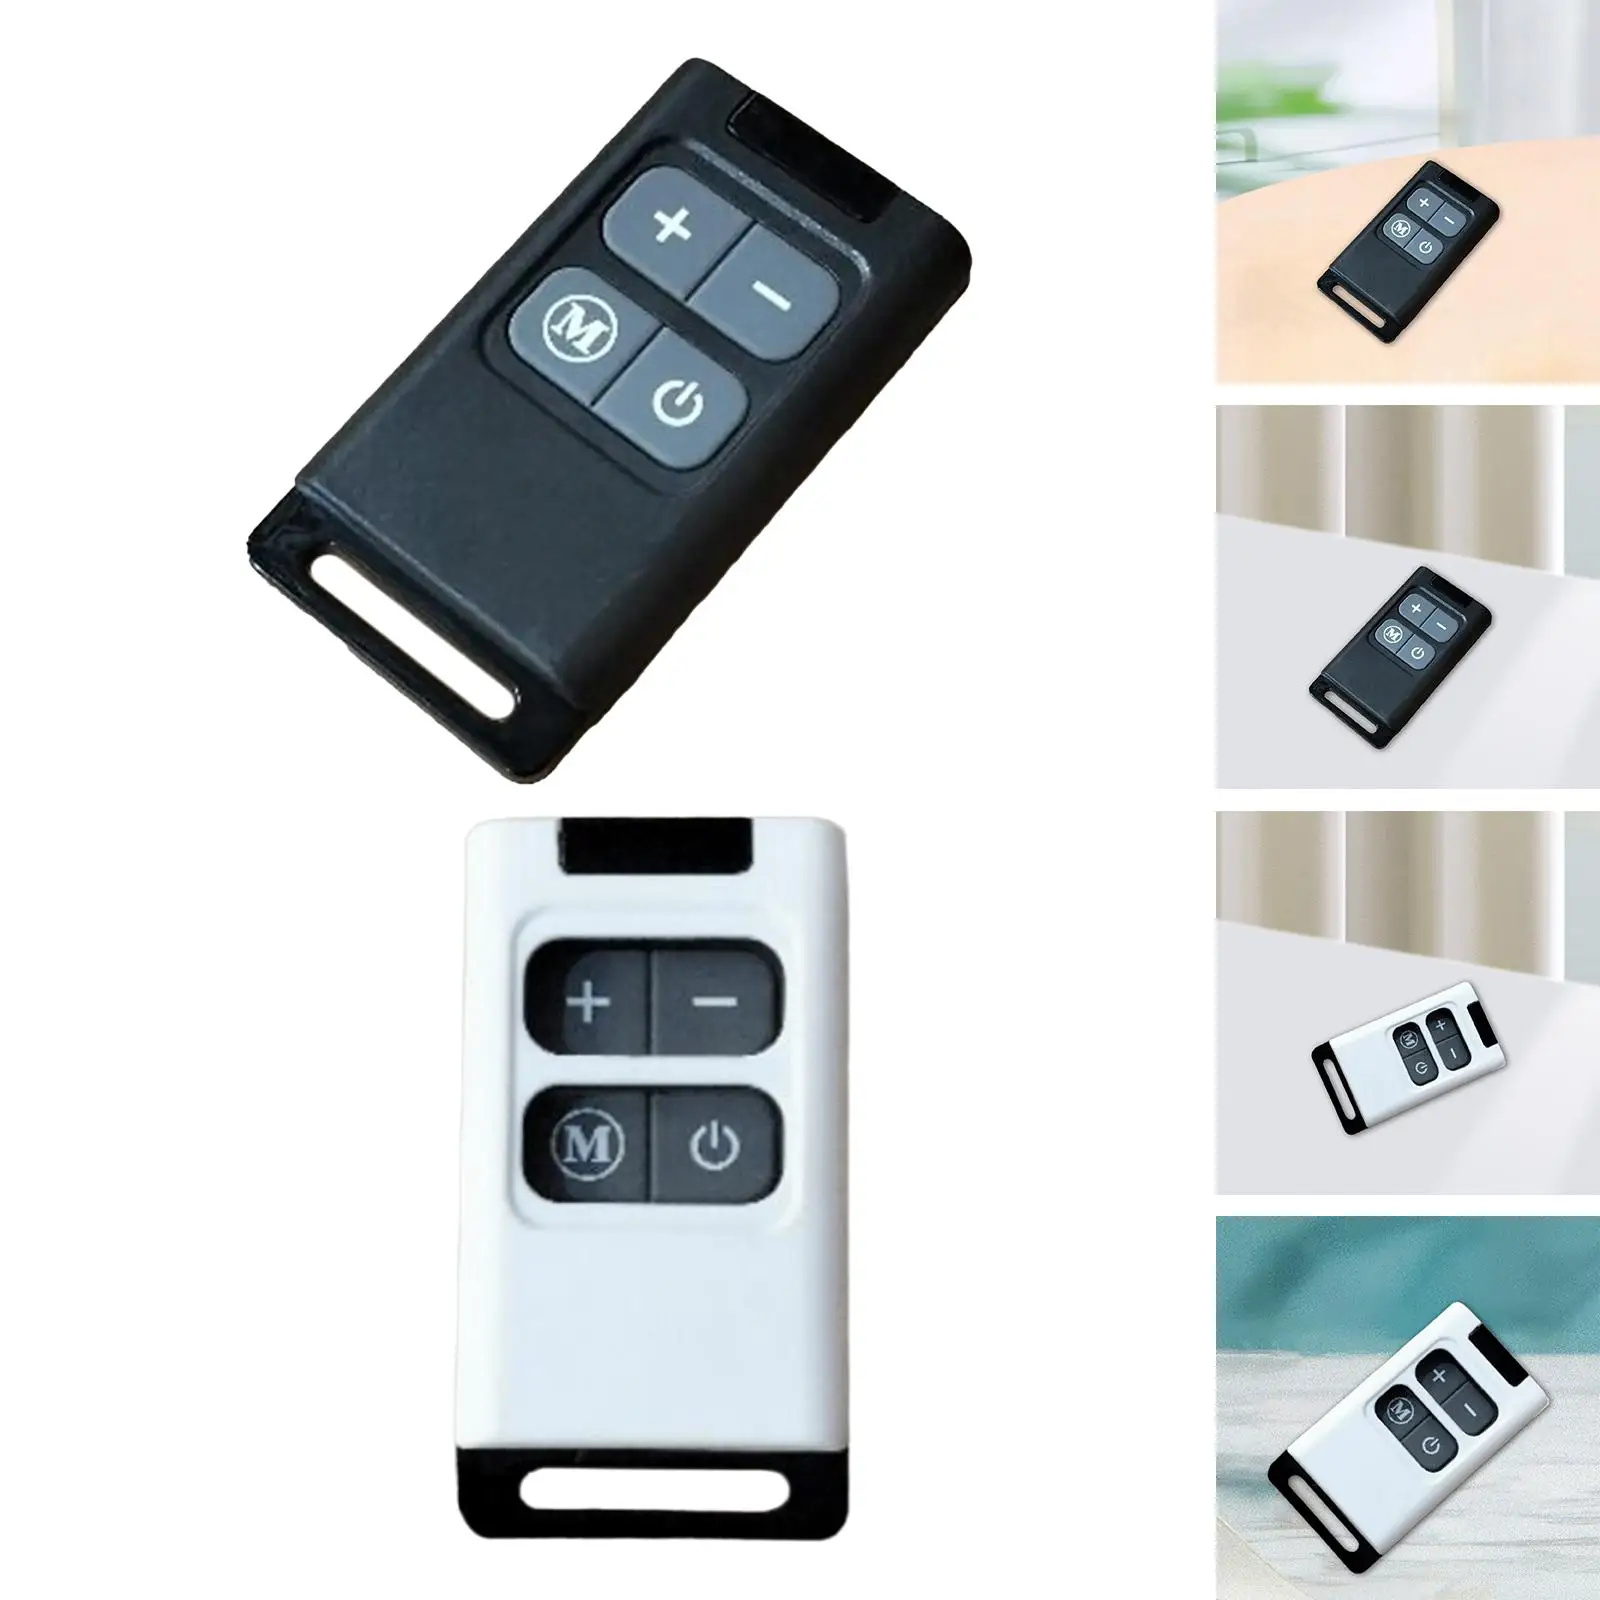 Car Parking Heater Remote Control for Air Parking Heater Vehicle Boat